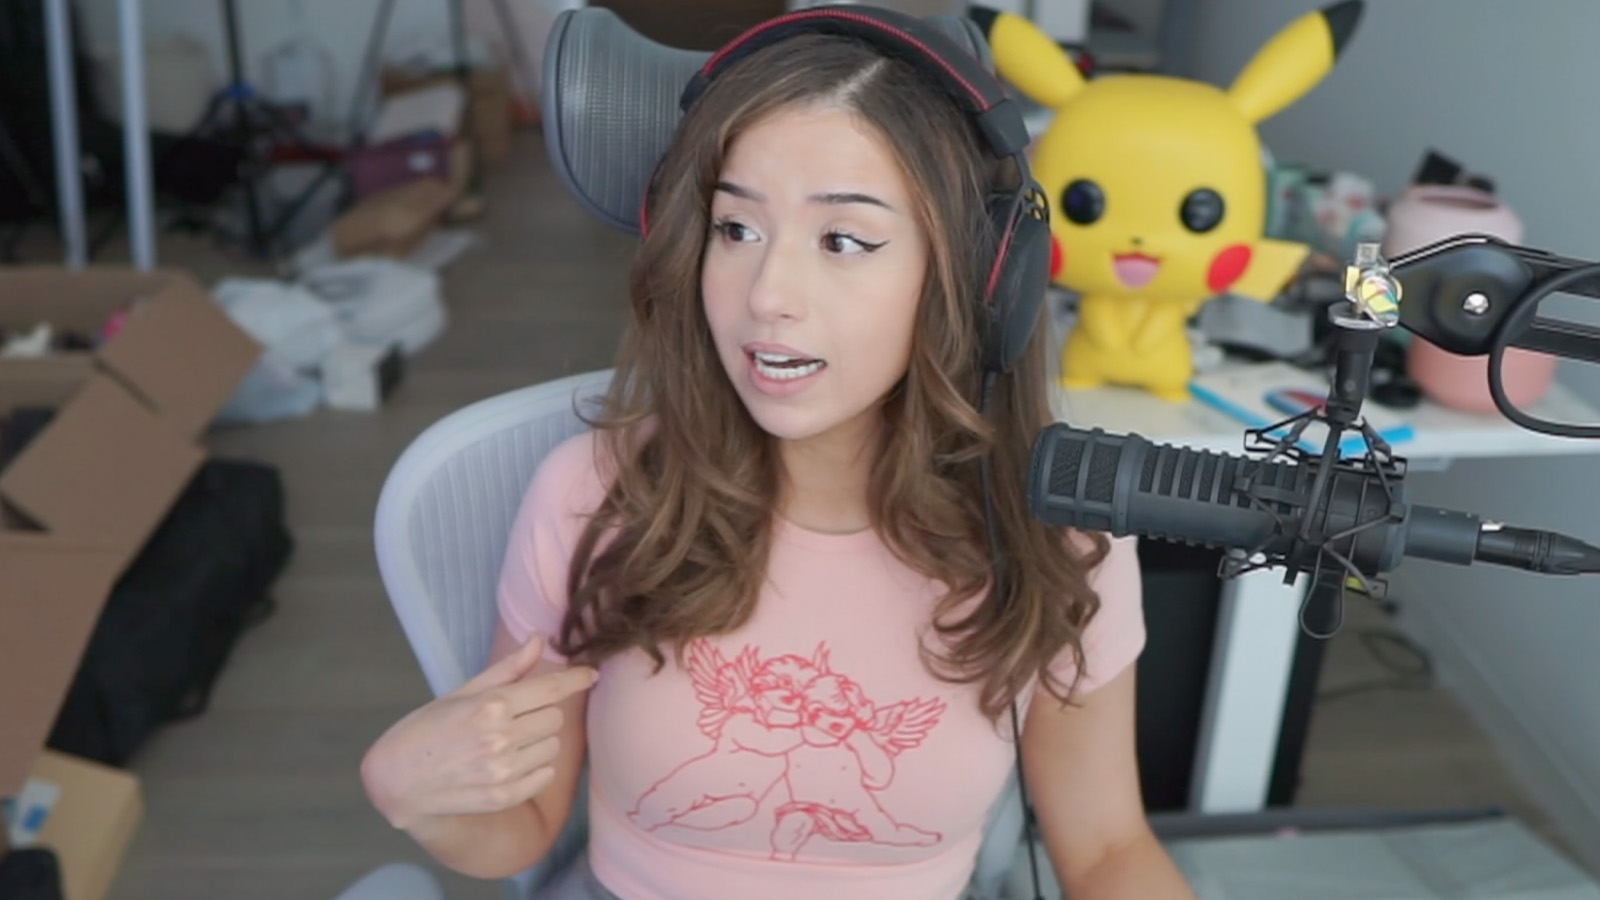 Pokimane is hesitant to actually take part in Twitch boxing